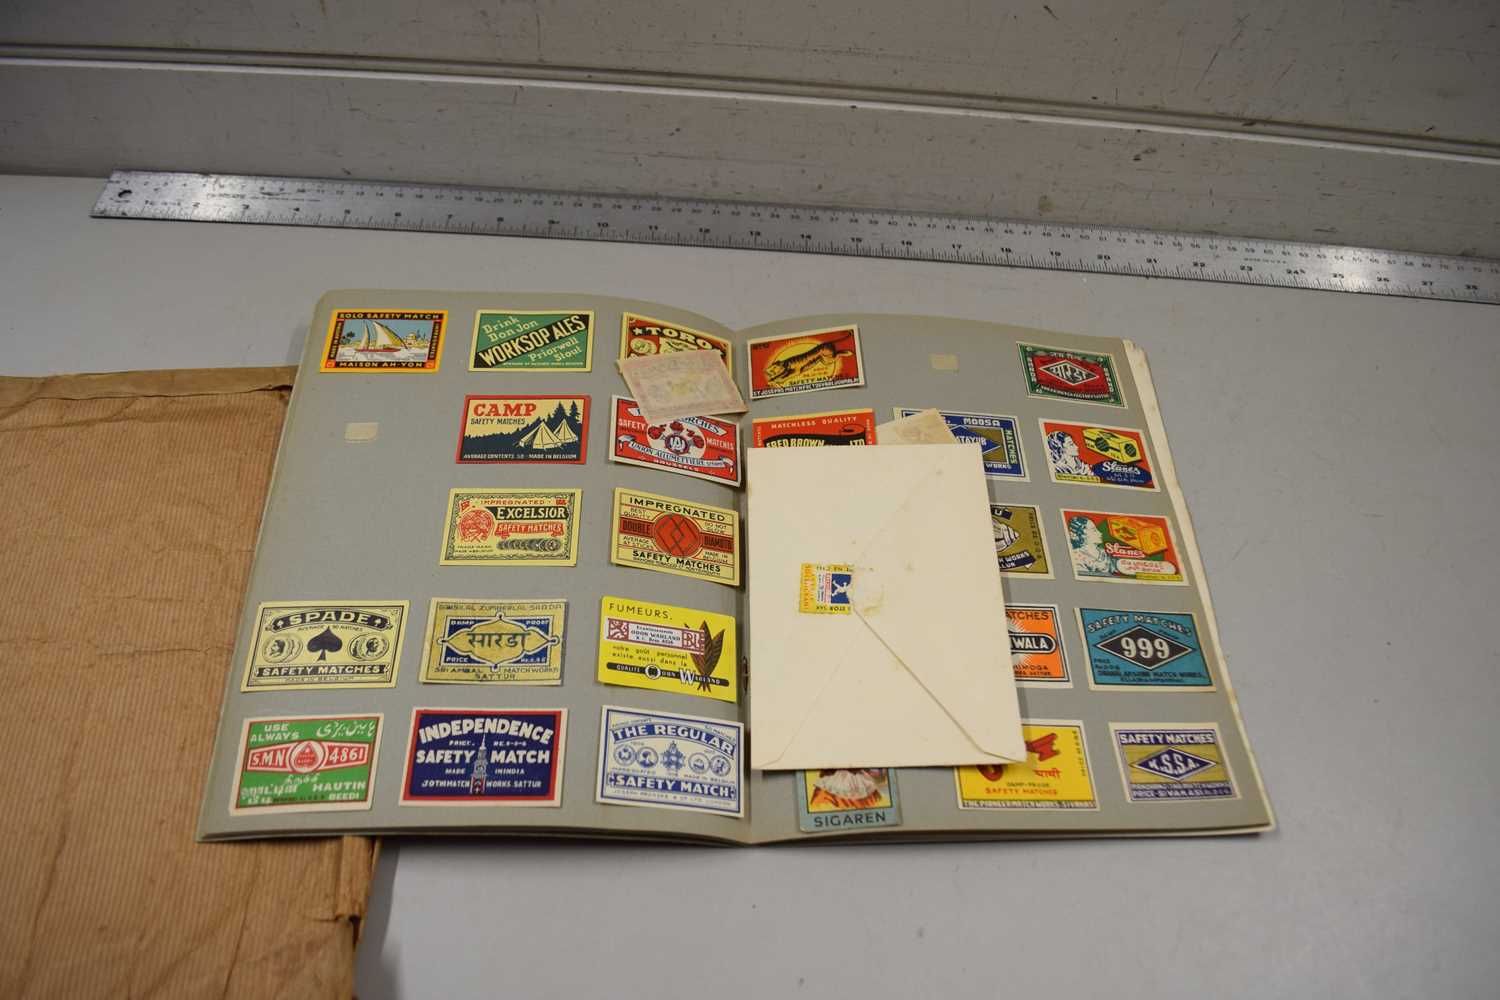 Scrap album containing a collection of various match box labels